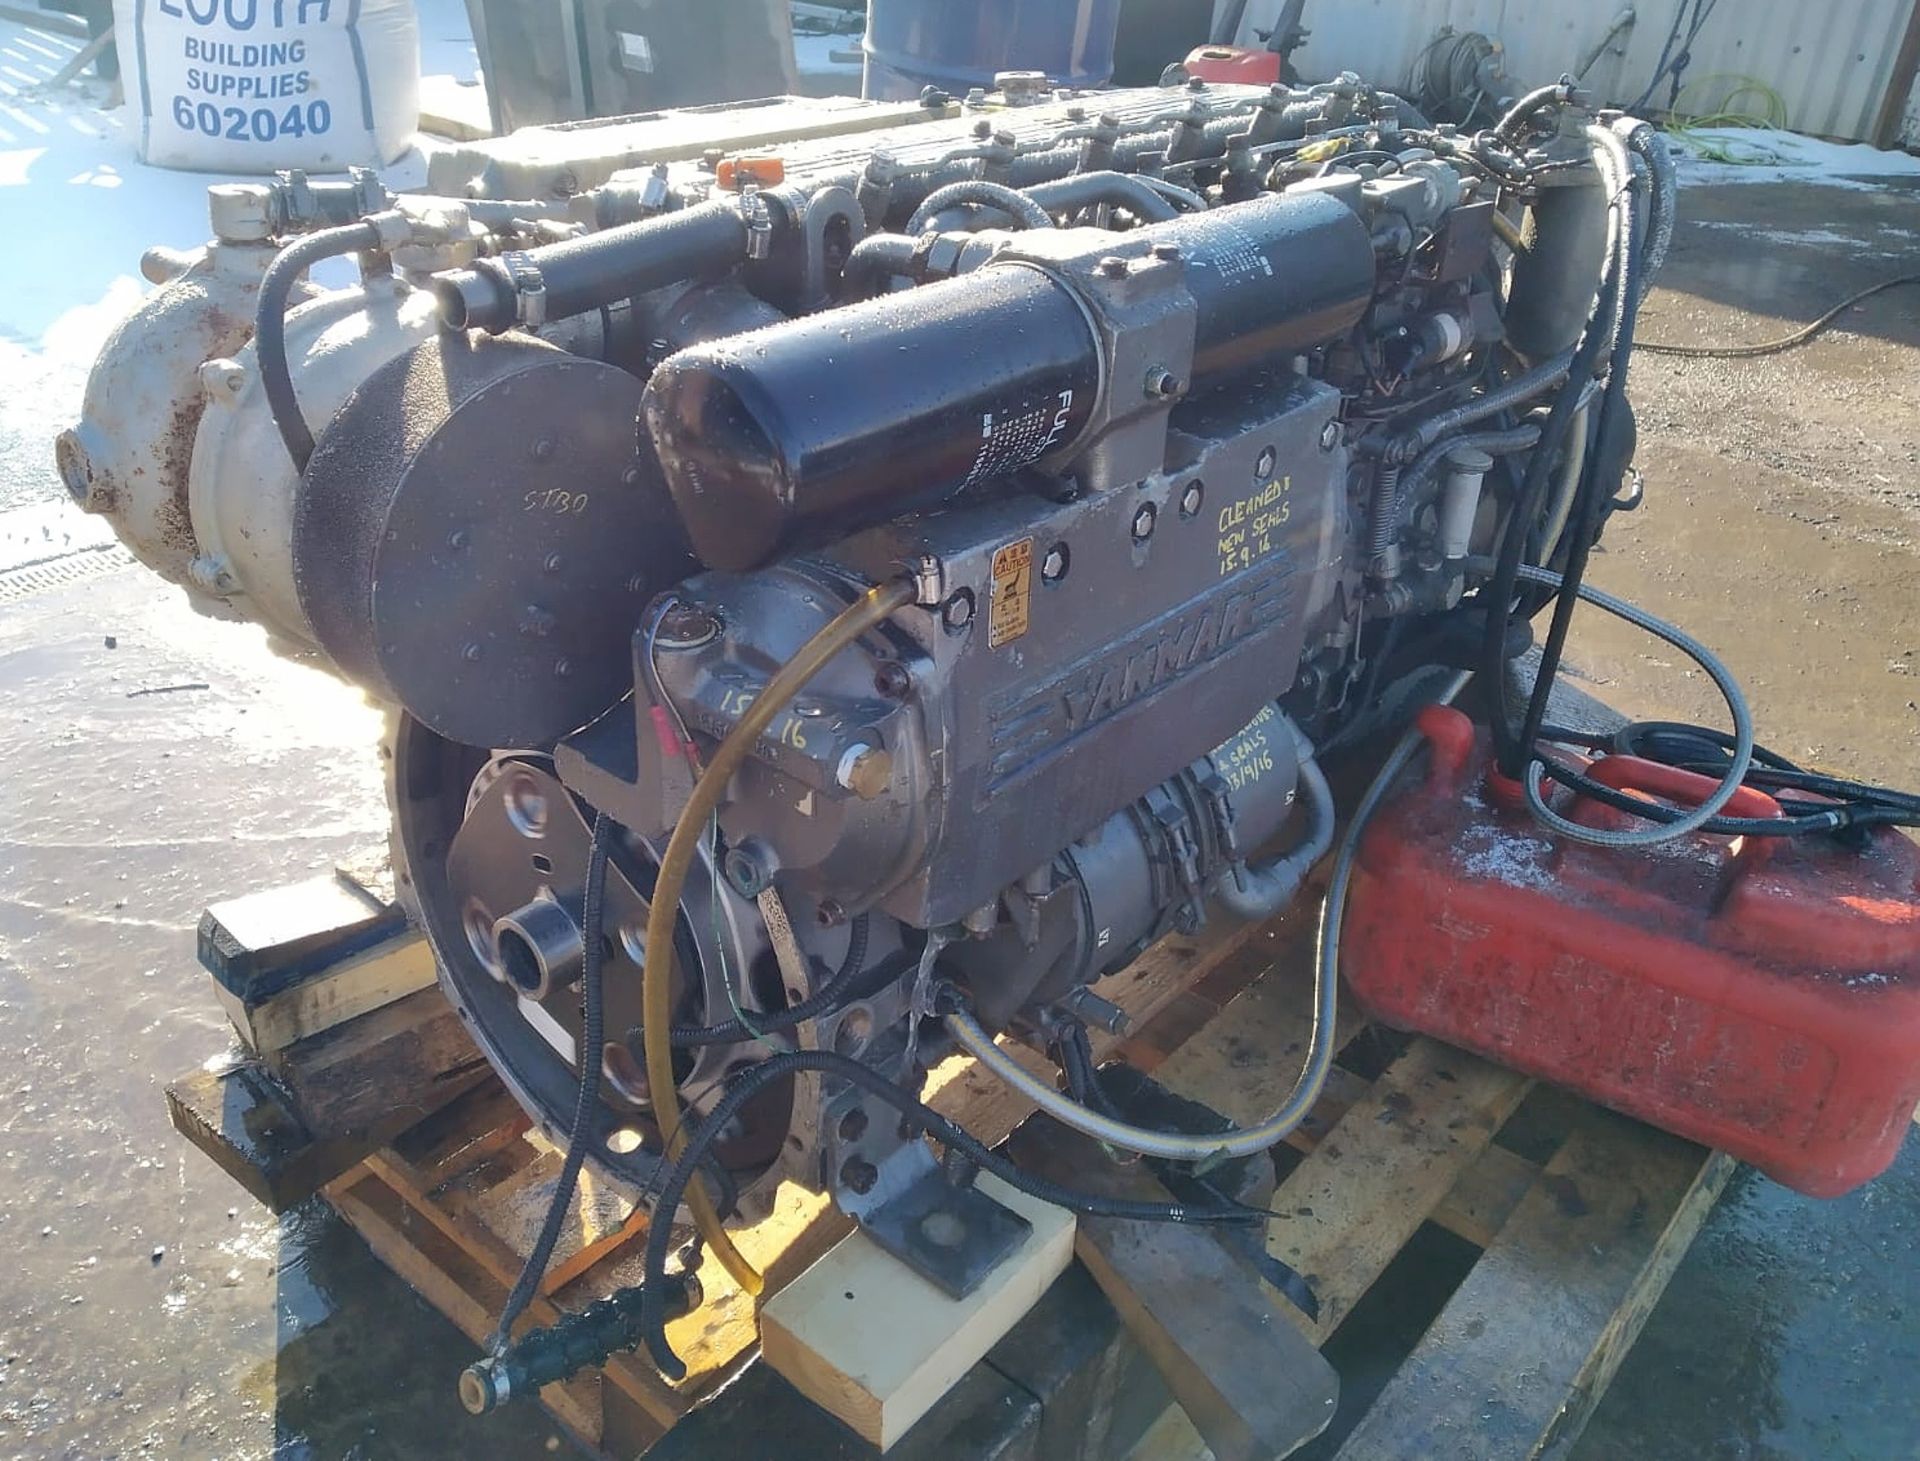 Yanmar RCD-6LY2X1 Diesel Boat Engine - 6LY2A-STP - 324kW (434HP) - possible coolant issue - Image 7 of 16